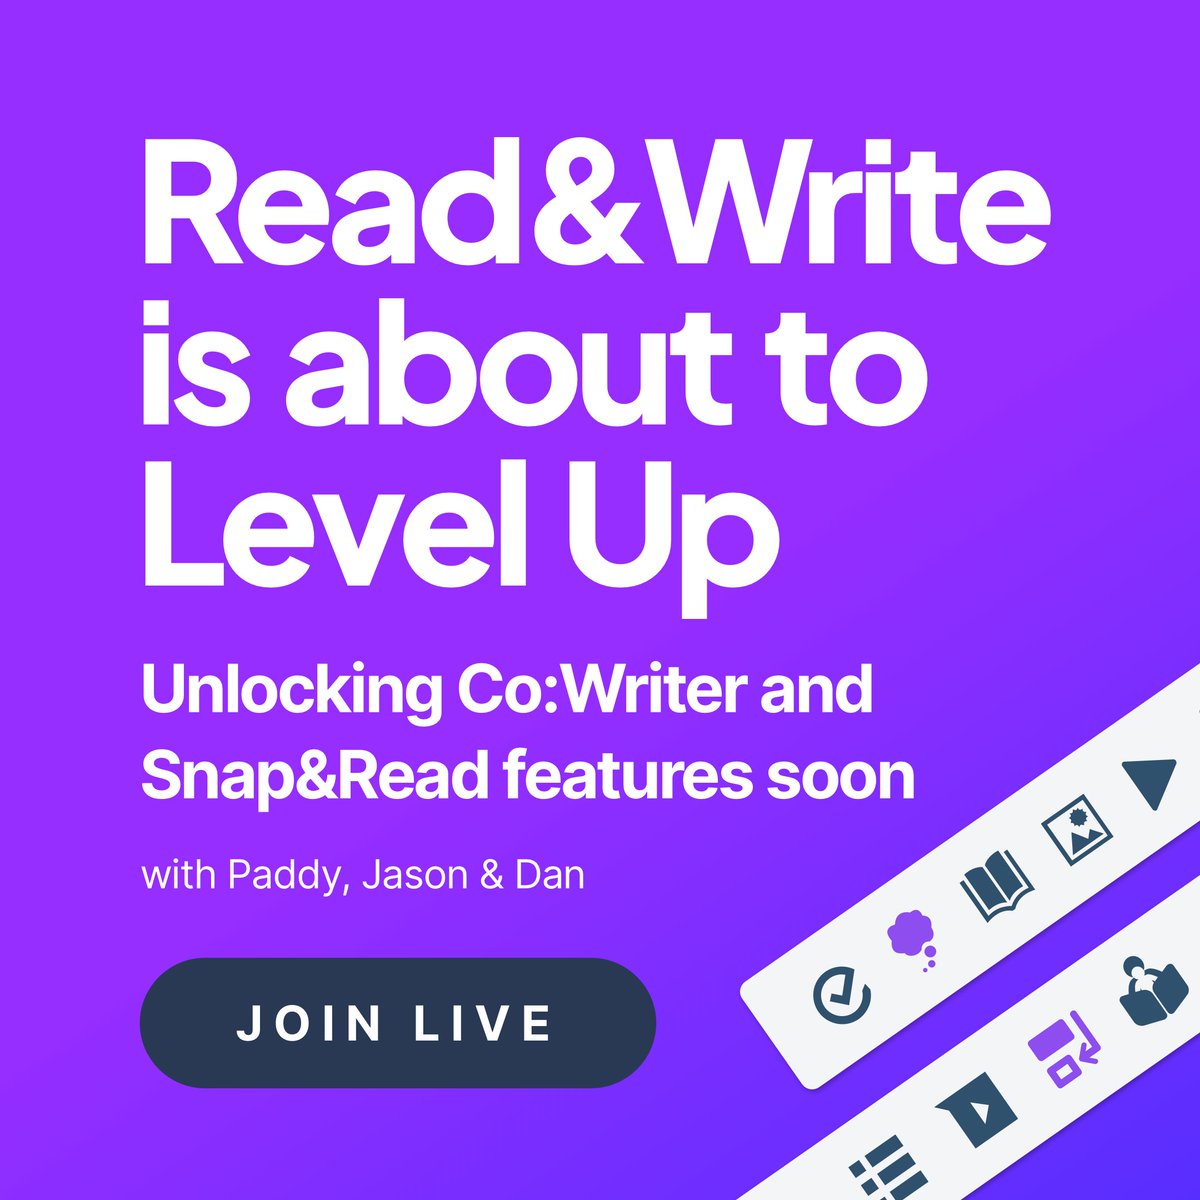 Read&Write customers - join us tomorrow for an exclusive sneak peek at our plans to bring tools from Co:Writer and Snap&Read into Read&Write to help transform support for diverse learners. Register today to secure your spot! text.help/9o0Jwf